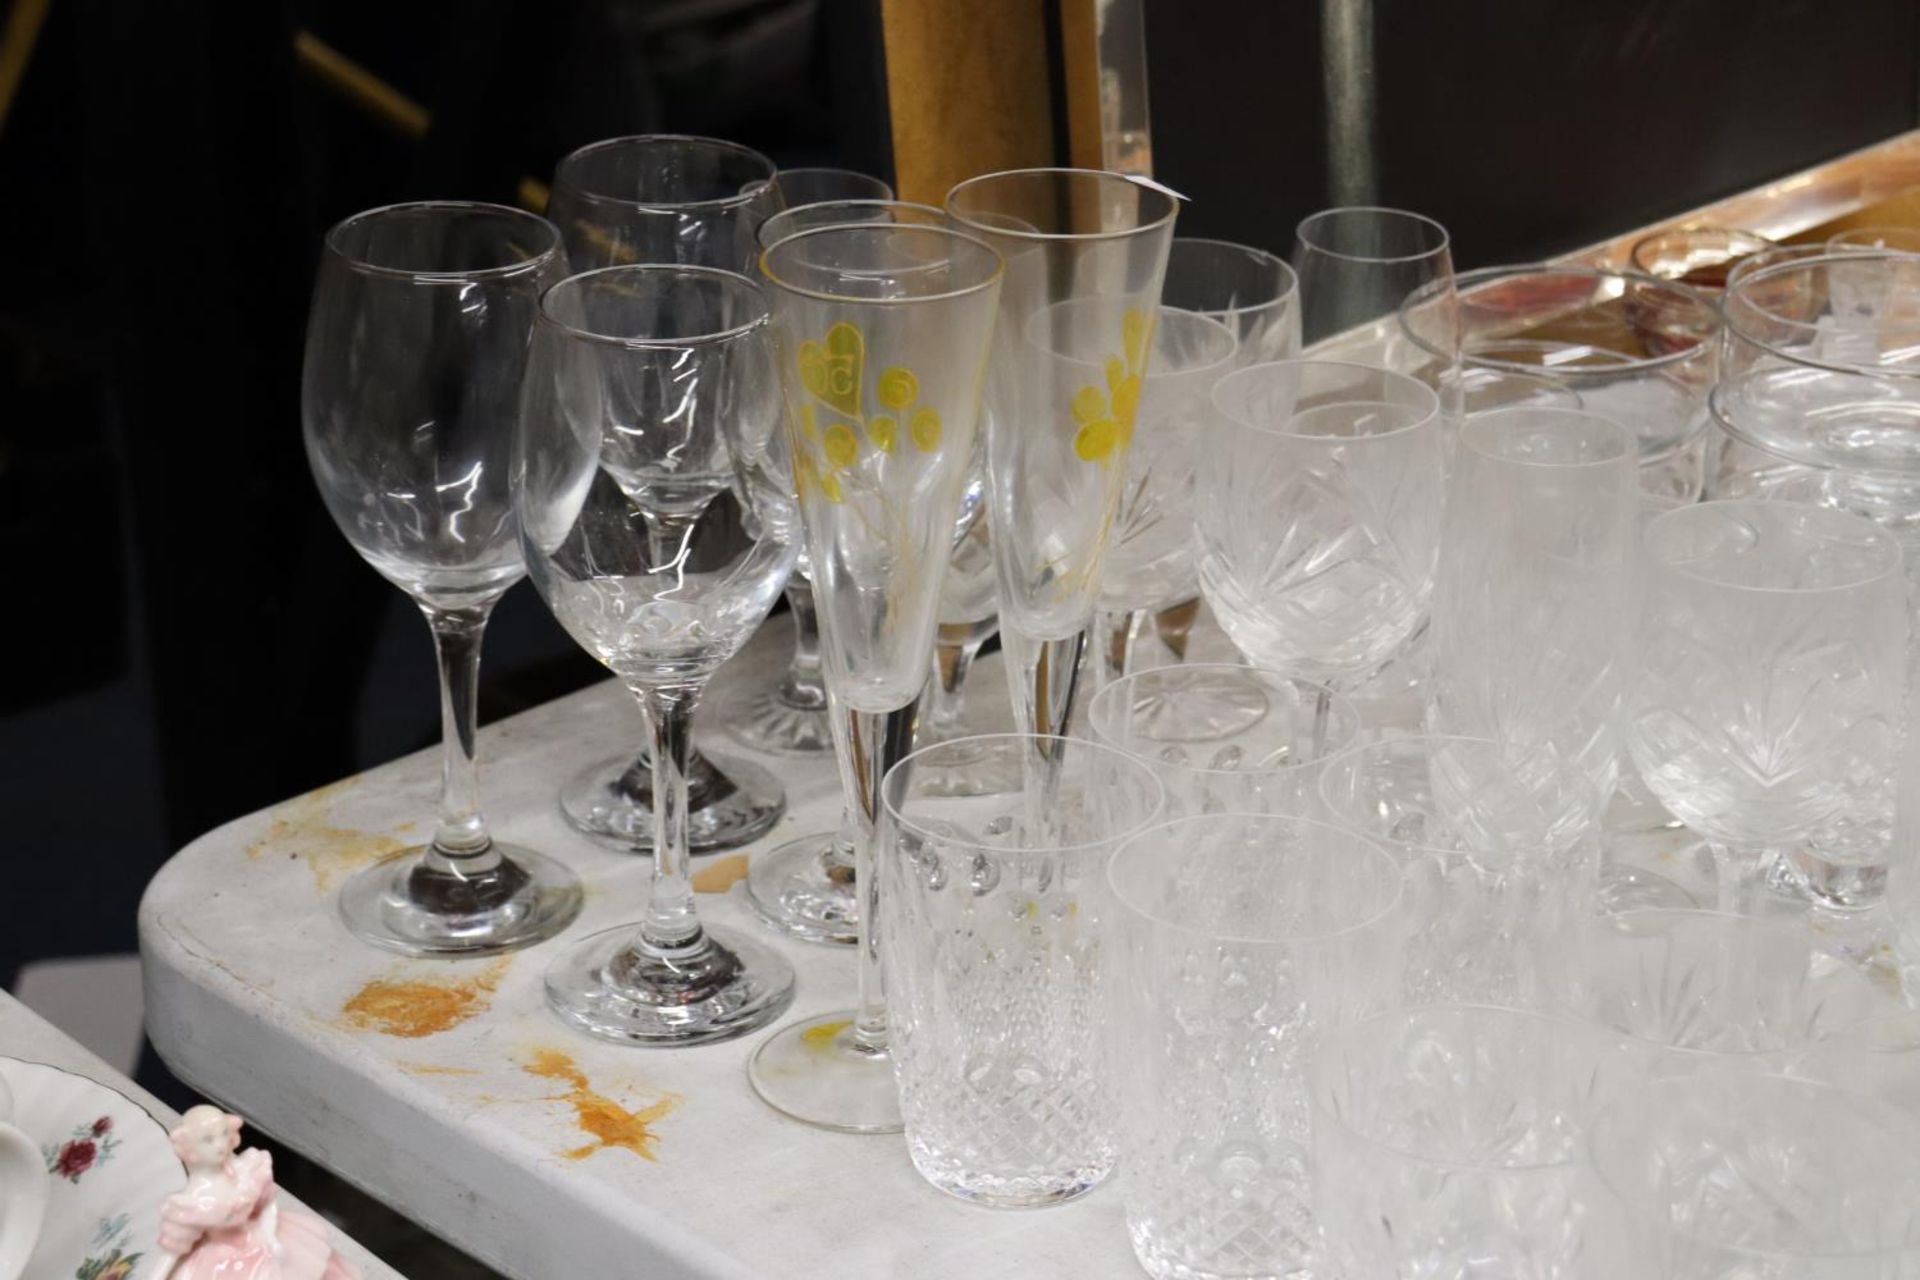 A LARGE QUANTITY OF GLASSES TO INCLUDE CHAMPAGNE FLUTES, WINE, SHERRY, TUMBLERS, DESSERT BOWLS, ETC - Image 3 of 6